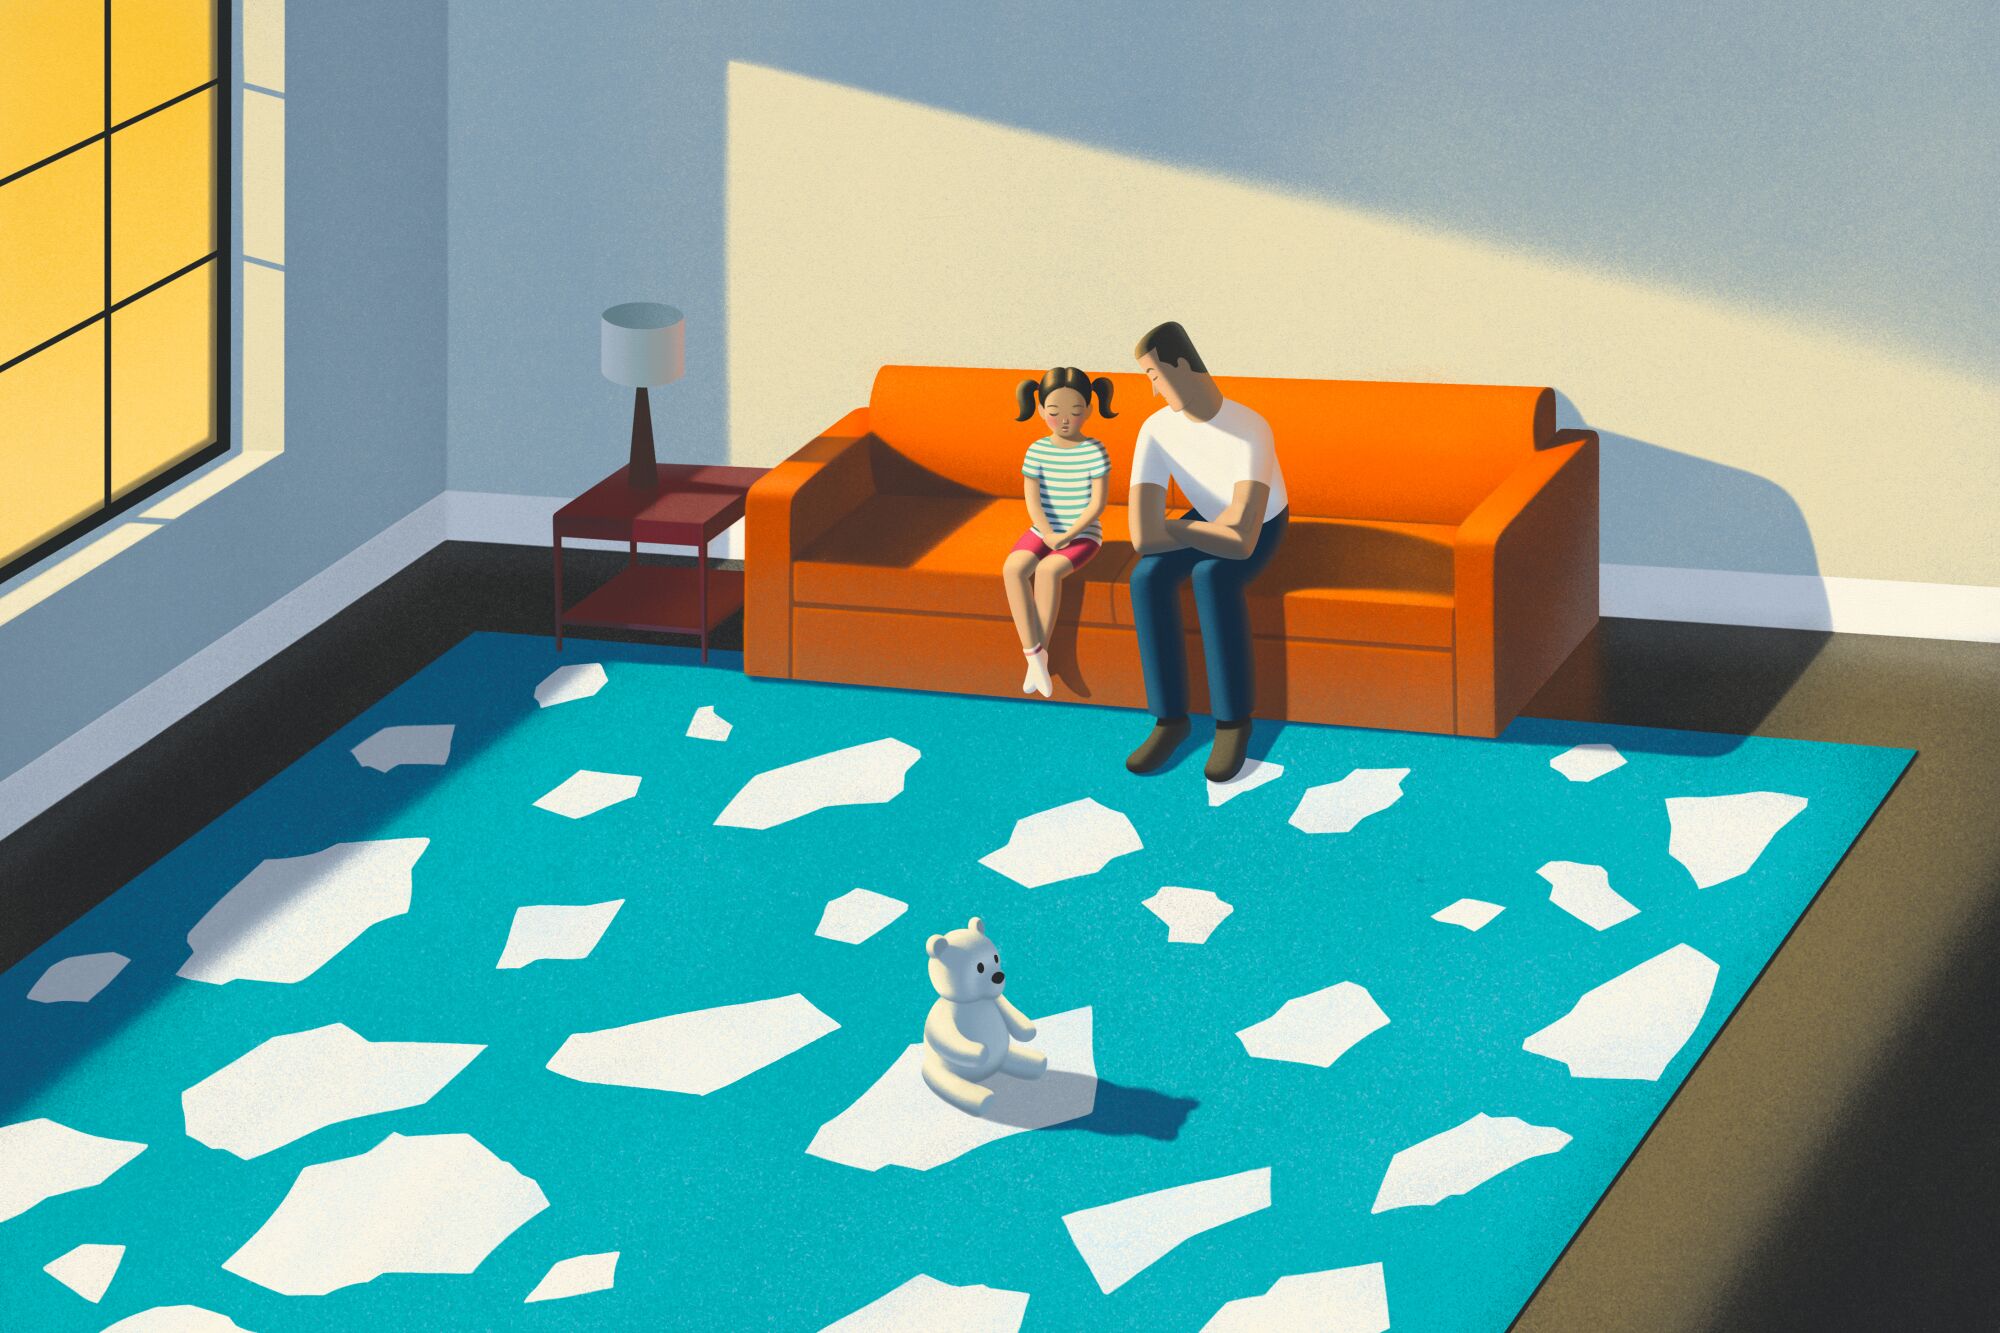 Illustration of a father and daughter on a sofa talking. the carpet looks like broken melting ice floes with a polar bear.